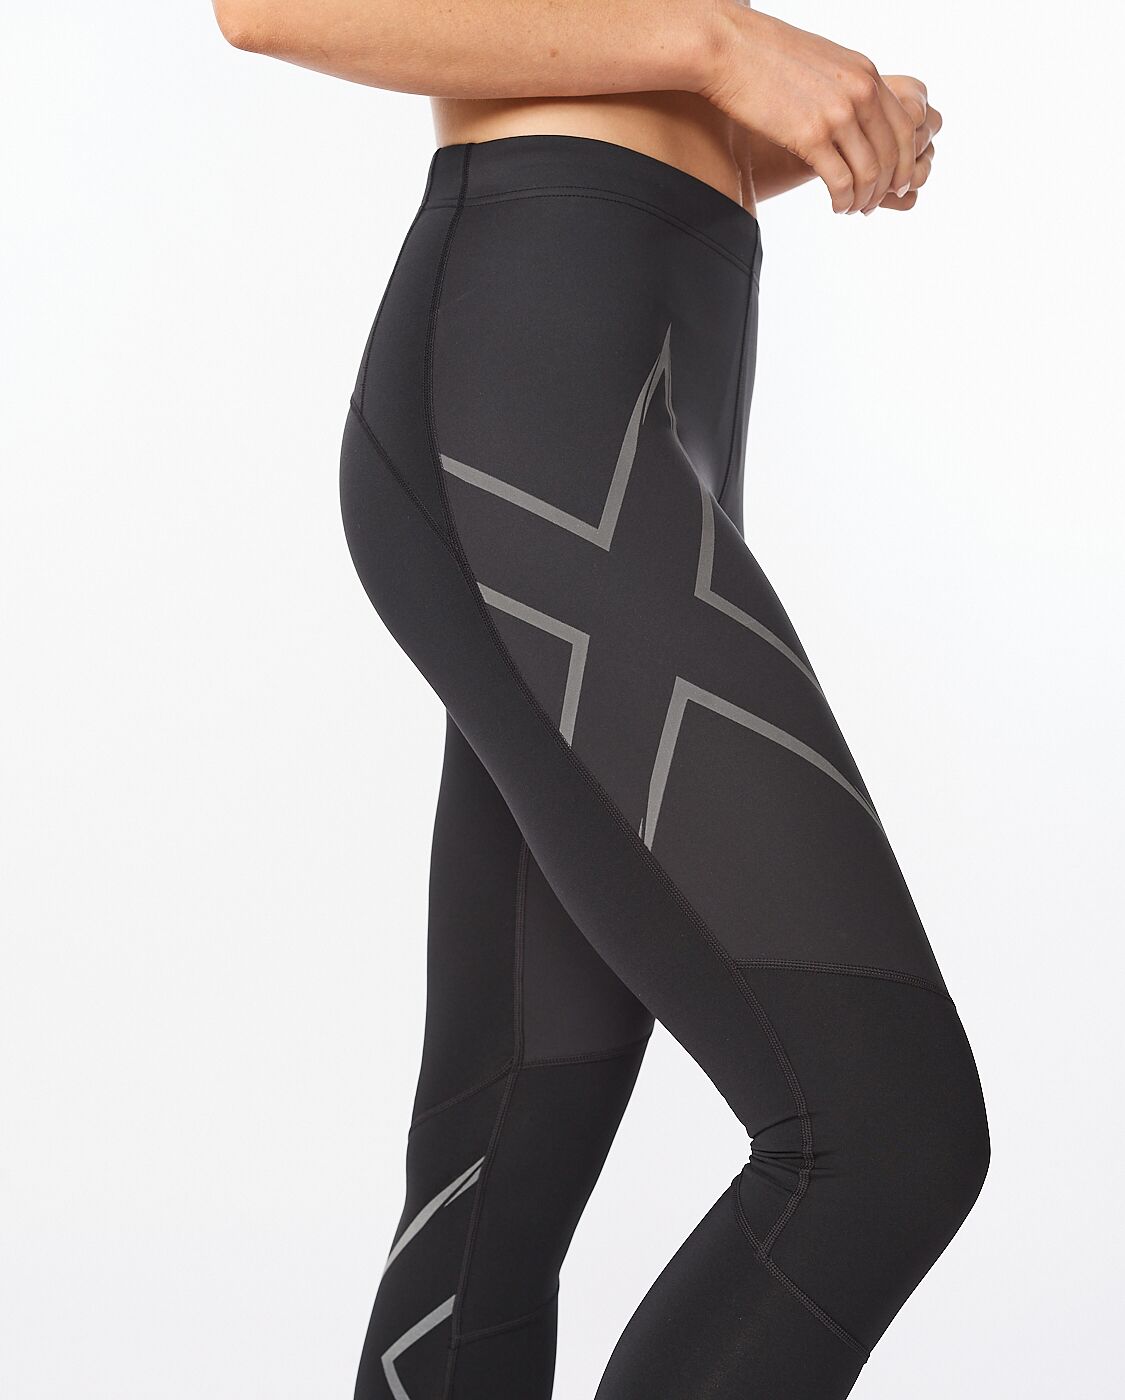  2XU Men's Ignition Shield Compression Tights - Powerful Support  & Warmth - Black/Black Reflective - Size Small : Clothing, Shoes & Jewelry